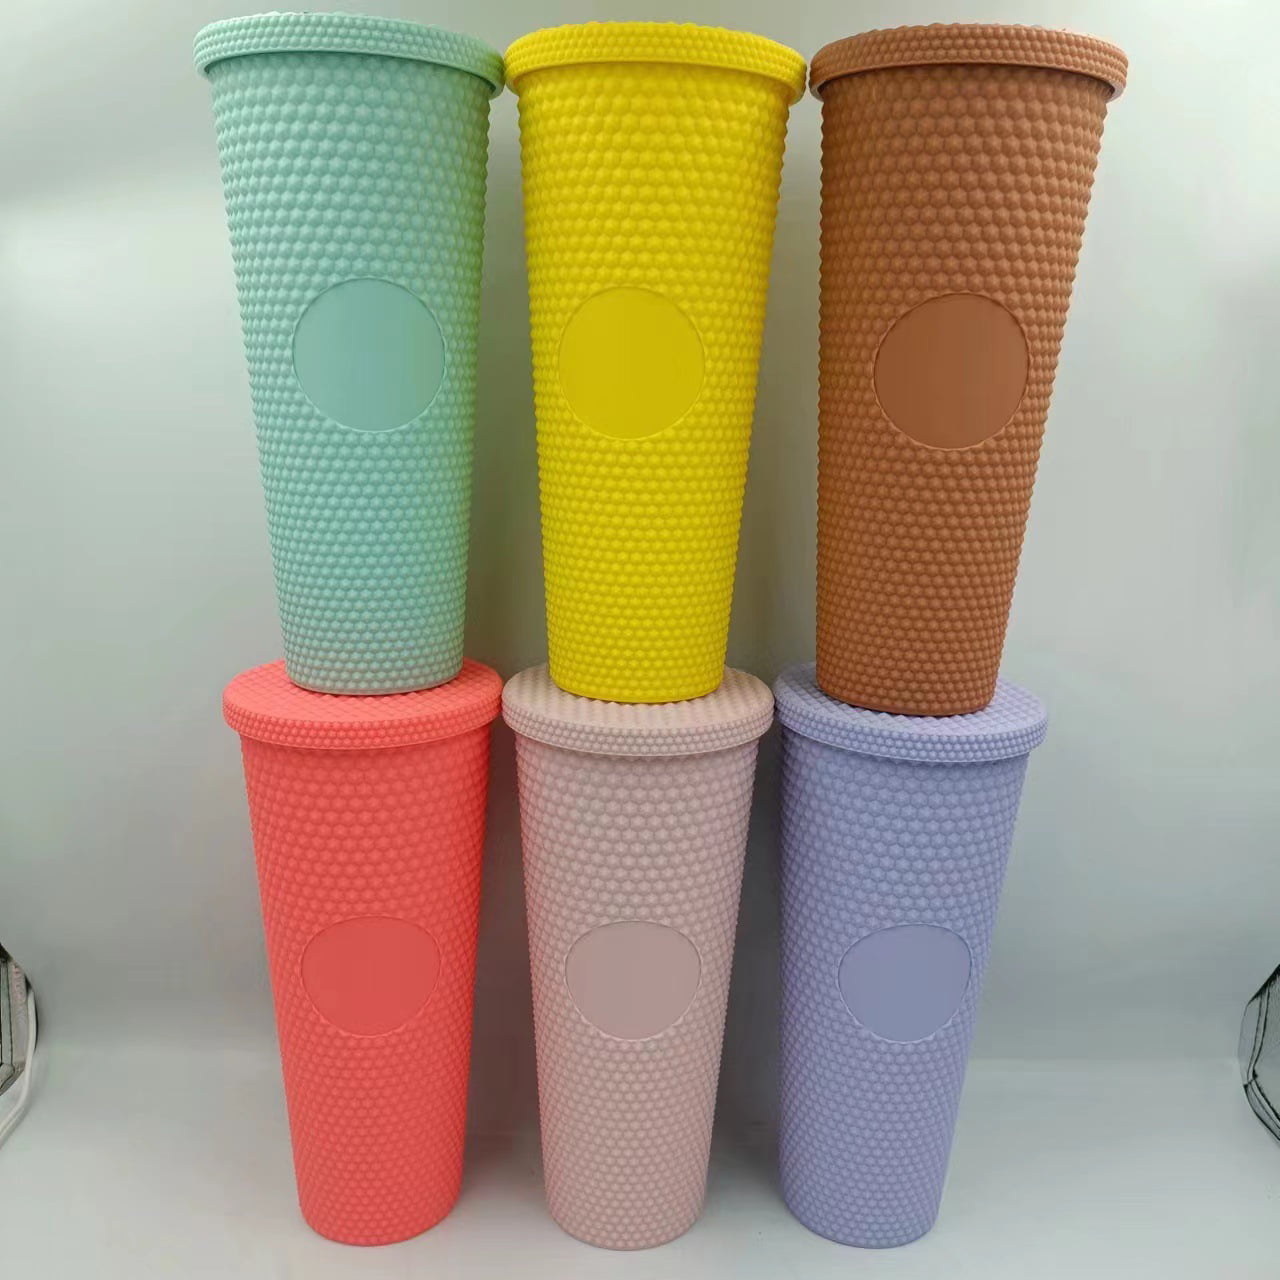 Happon 24 oz Matte Plastic Studded Cup Double Wall Studded Water Tumbler  Plastic Inlaid Rivet Cup with Straw and Lid (Red) 